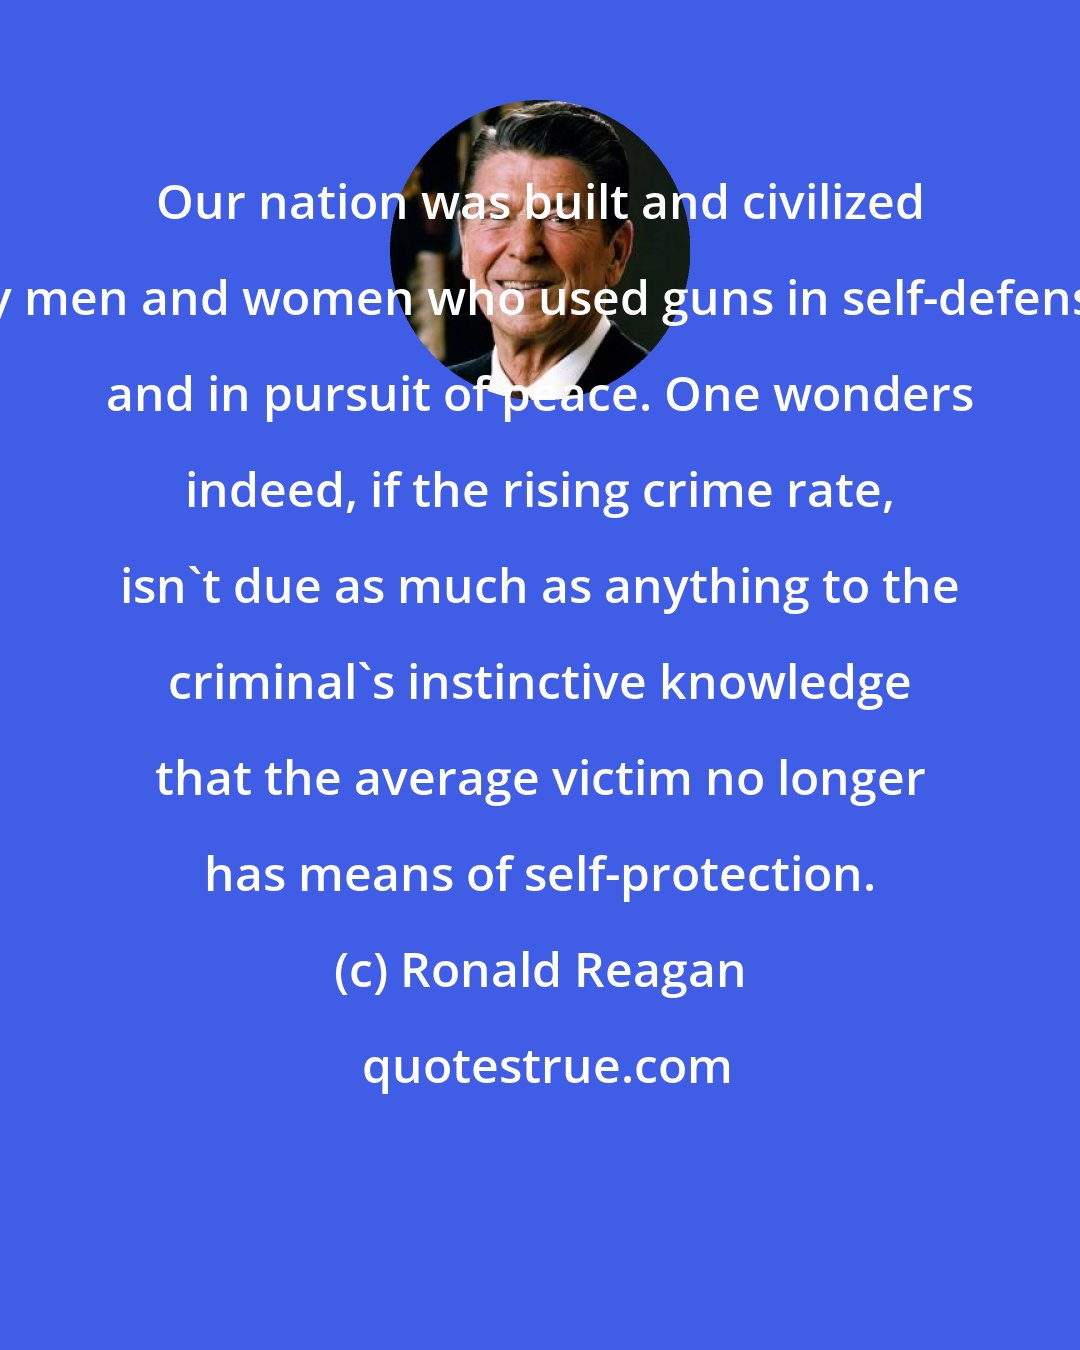 Ronald Reagan: Our nation was built and civilized by men and women who used guns in self-defense and in pursuit of peace. One wonders indeed, if the rising crime rate, isn't due as much as anything to the criminal's instinctive knowledge that the average victim no longer has means of self-protection.